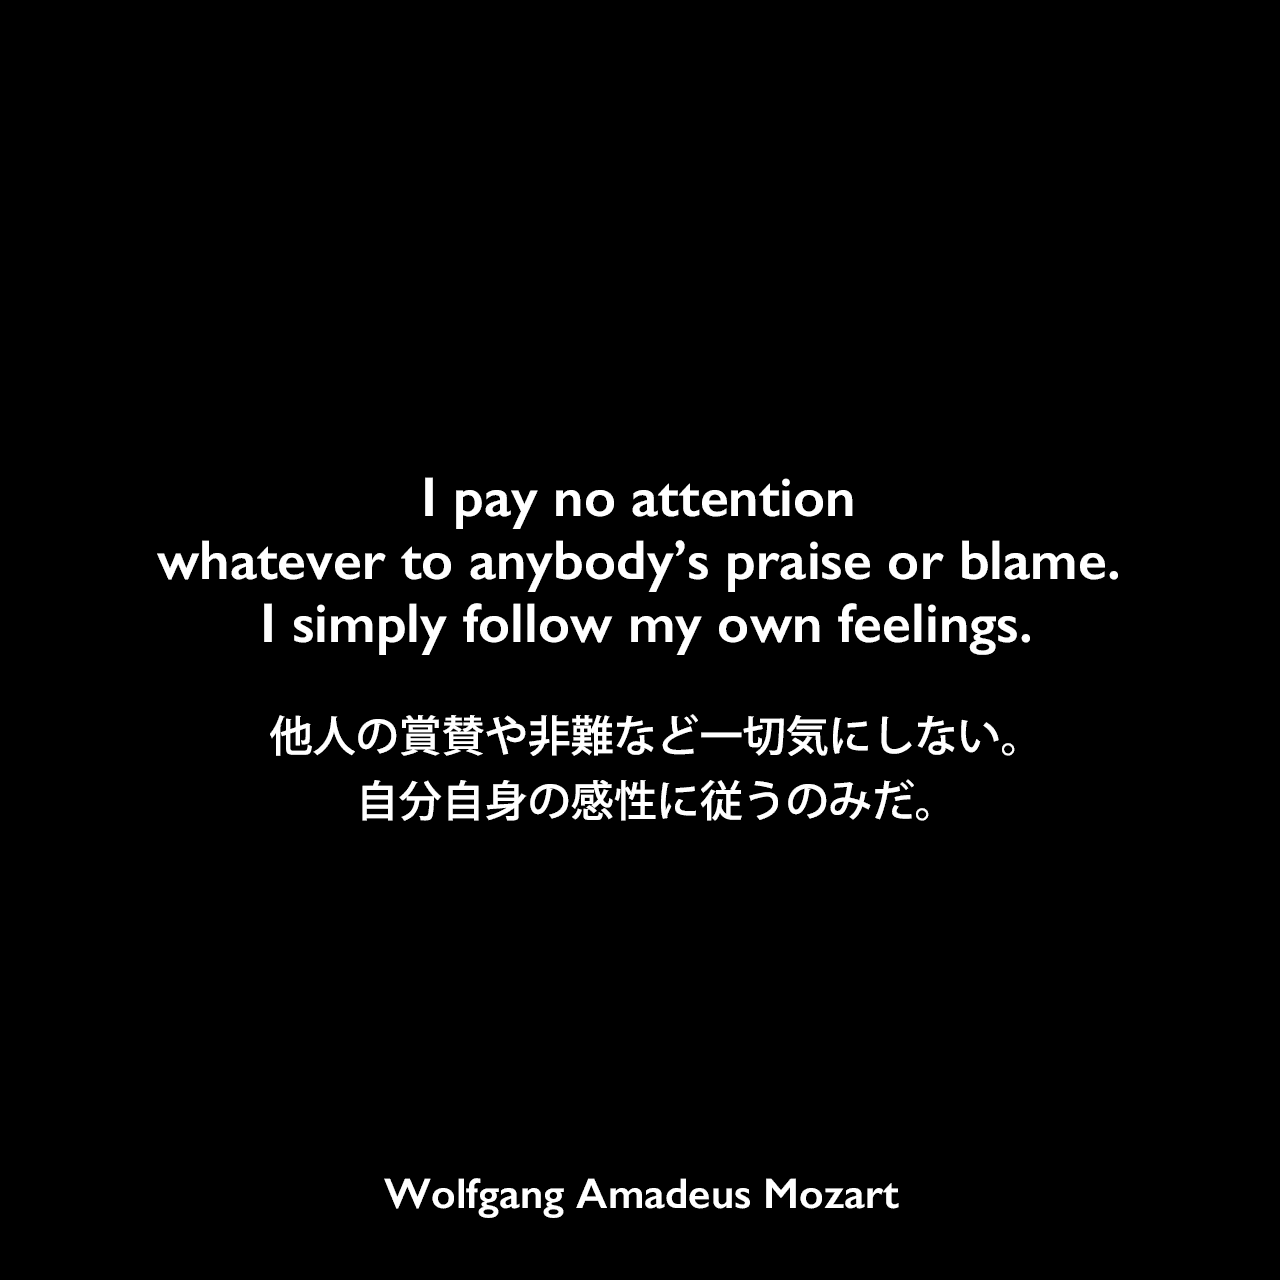 I pay no attention whatever to anybody’s praise or blame. I simply follow my own feelings.他人の賞賛や非難など一切気にしない。自分自身の感性に従うのみだ。Wolfgang Amadeus Mozart